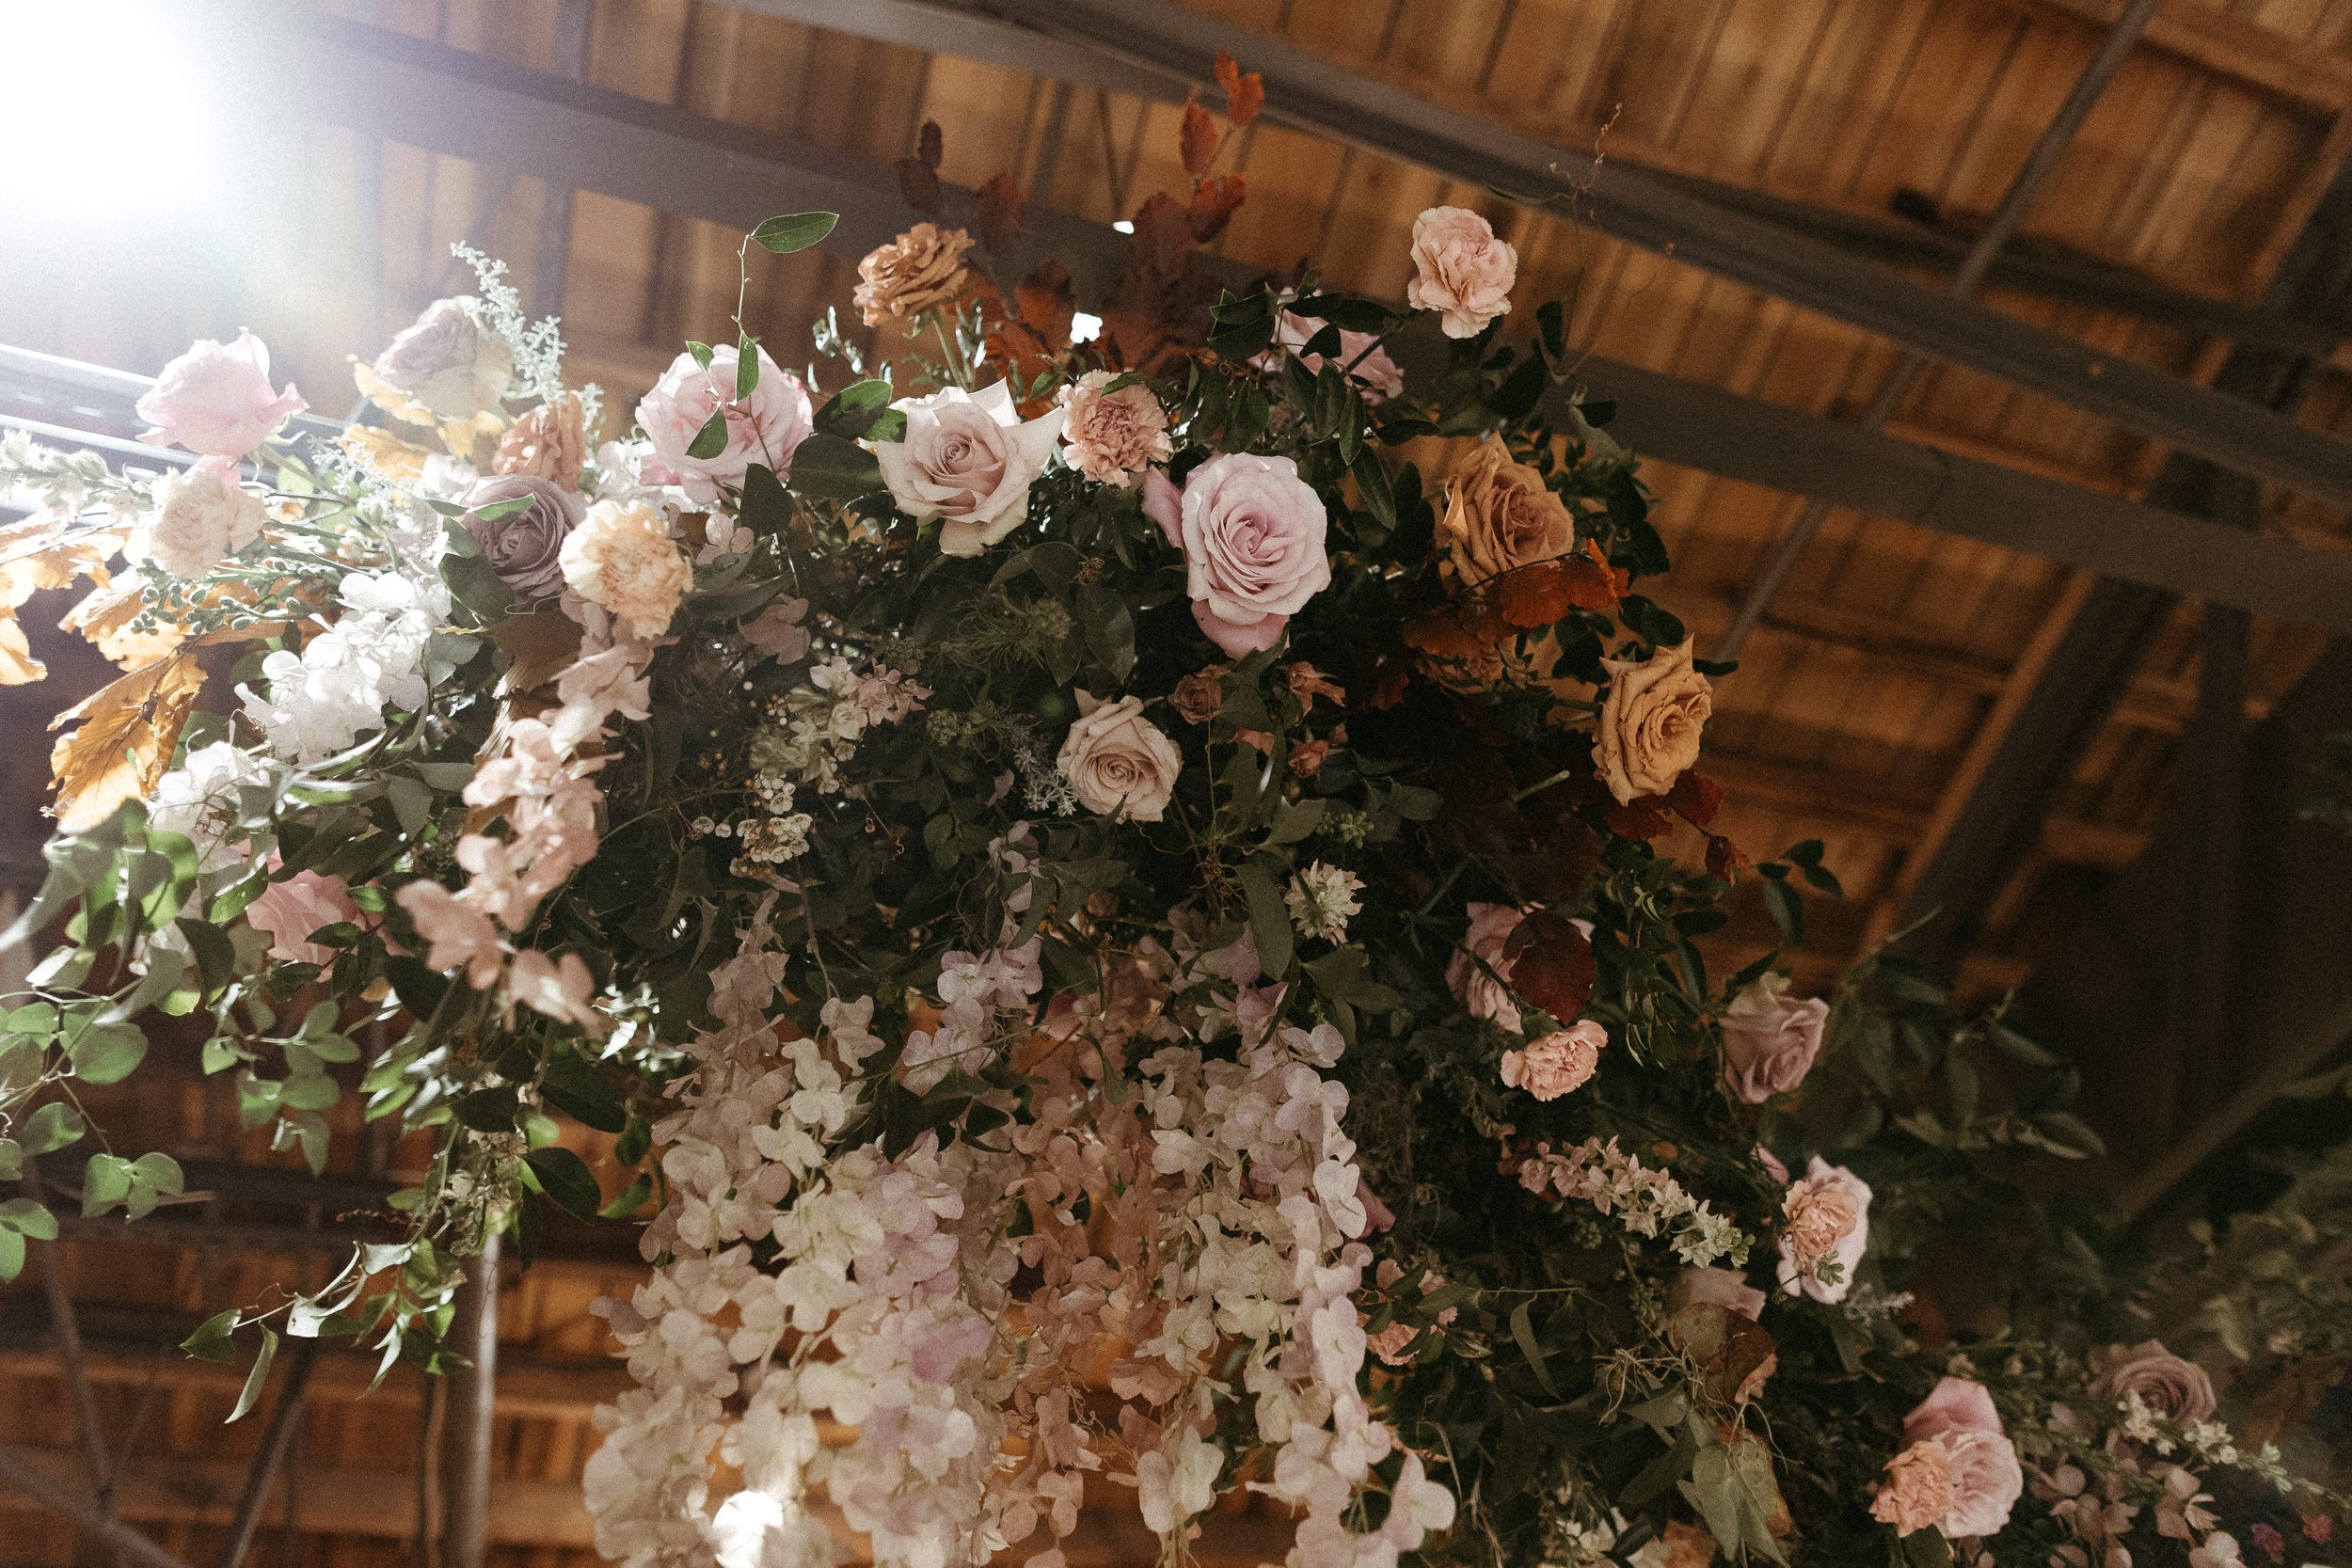 Stunning floral clouds accent this Great Gatsby inspired winter wedding. Hues of terra cotta, dusty pink, burgundy, and mauve are brought to life with petal heavy roses, wisteria, and pink pampas grass. Designed by Rosemary and Finch in Nashville, TN